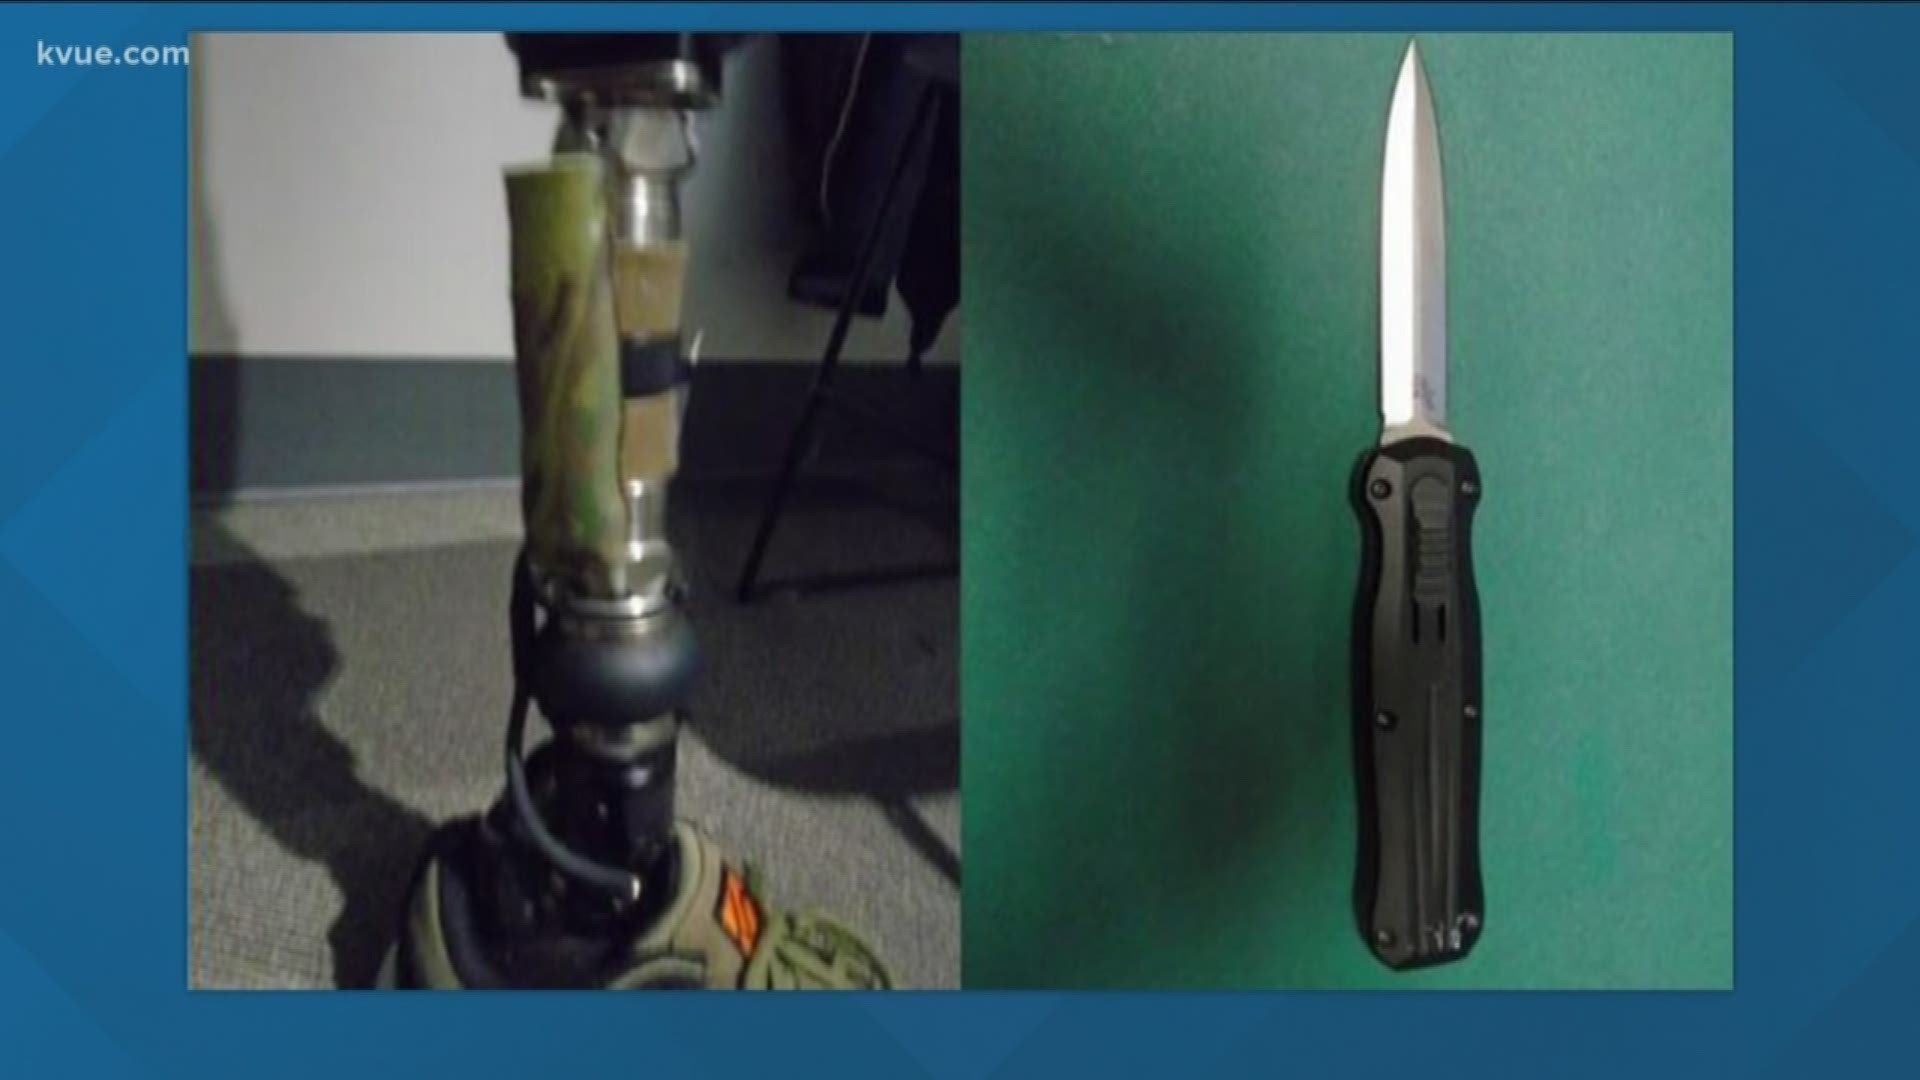 TSA officers at Austin Bergstrom International Airport on Feb. 6 found a knife attached to a passenger's prosthetic leg.